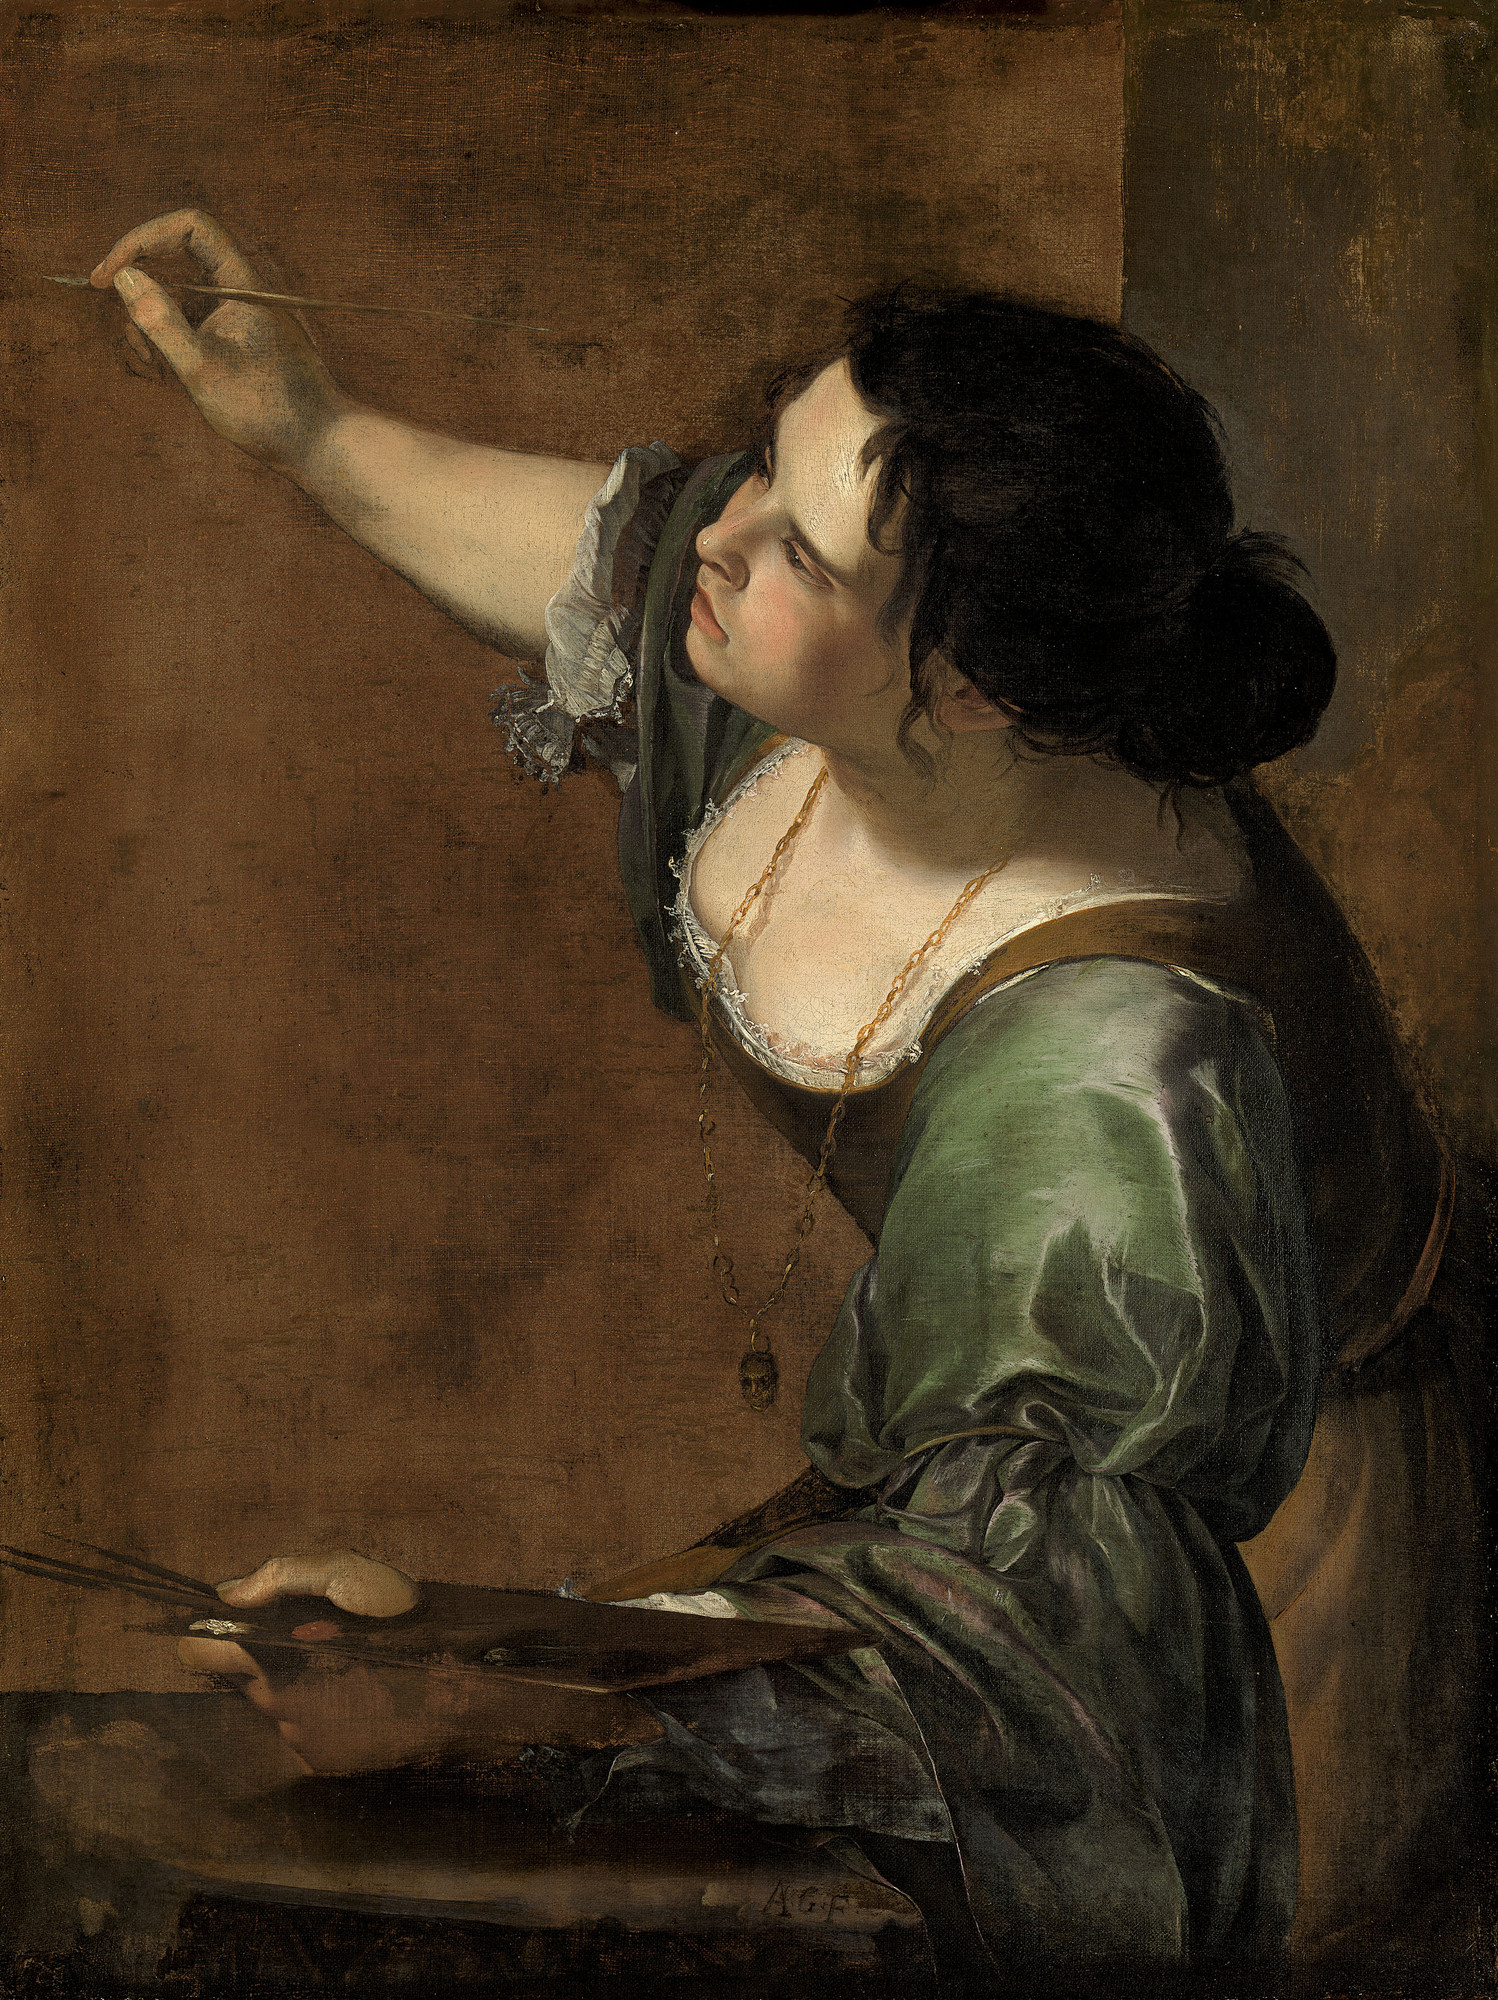 Self-Portrait as the Allegory of Painting by Artemisia Gentileschi - 1638-39 - 96.5 by 73.7 cm Royal Collection Trust